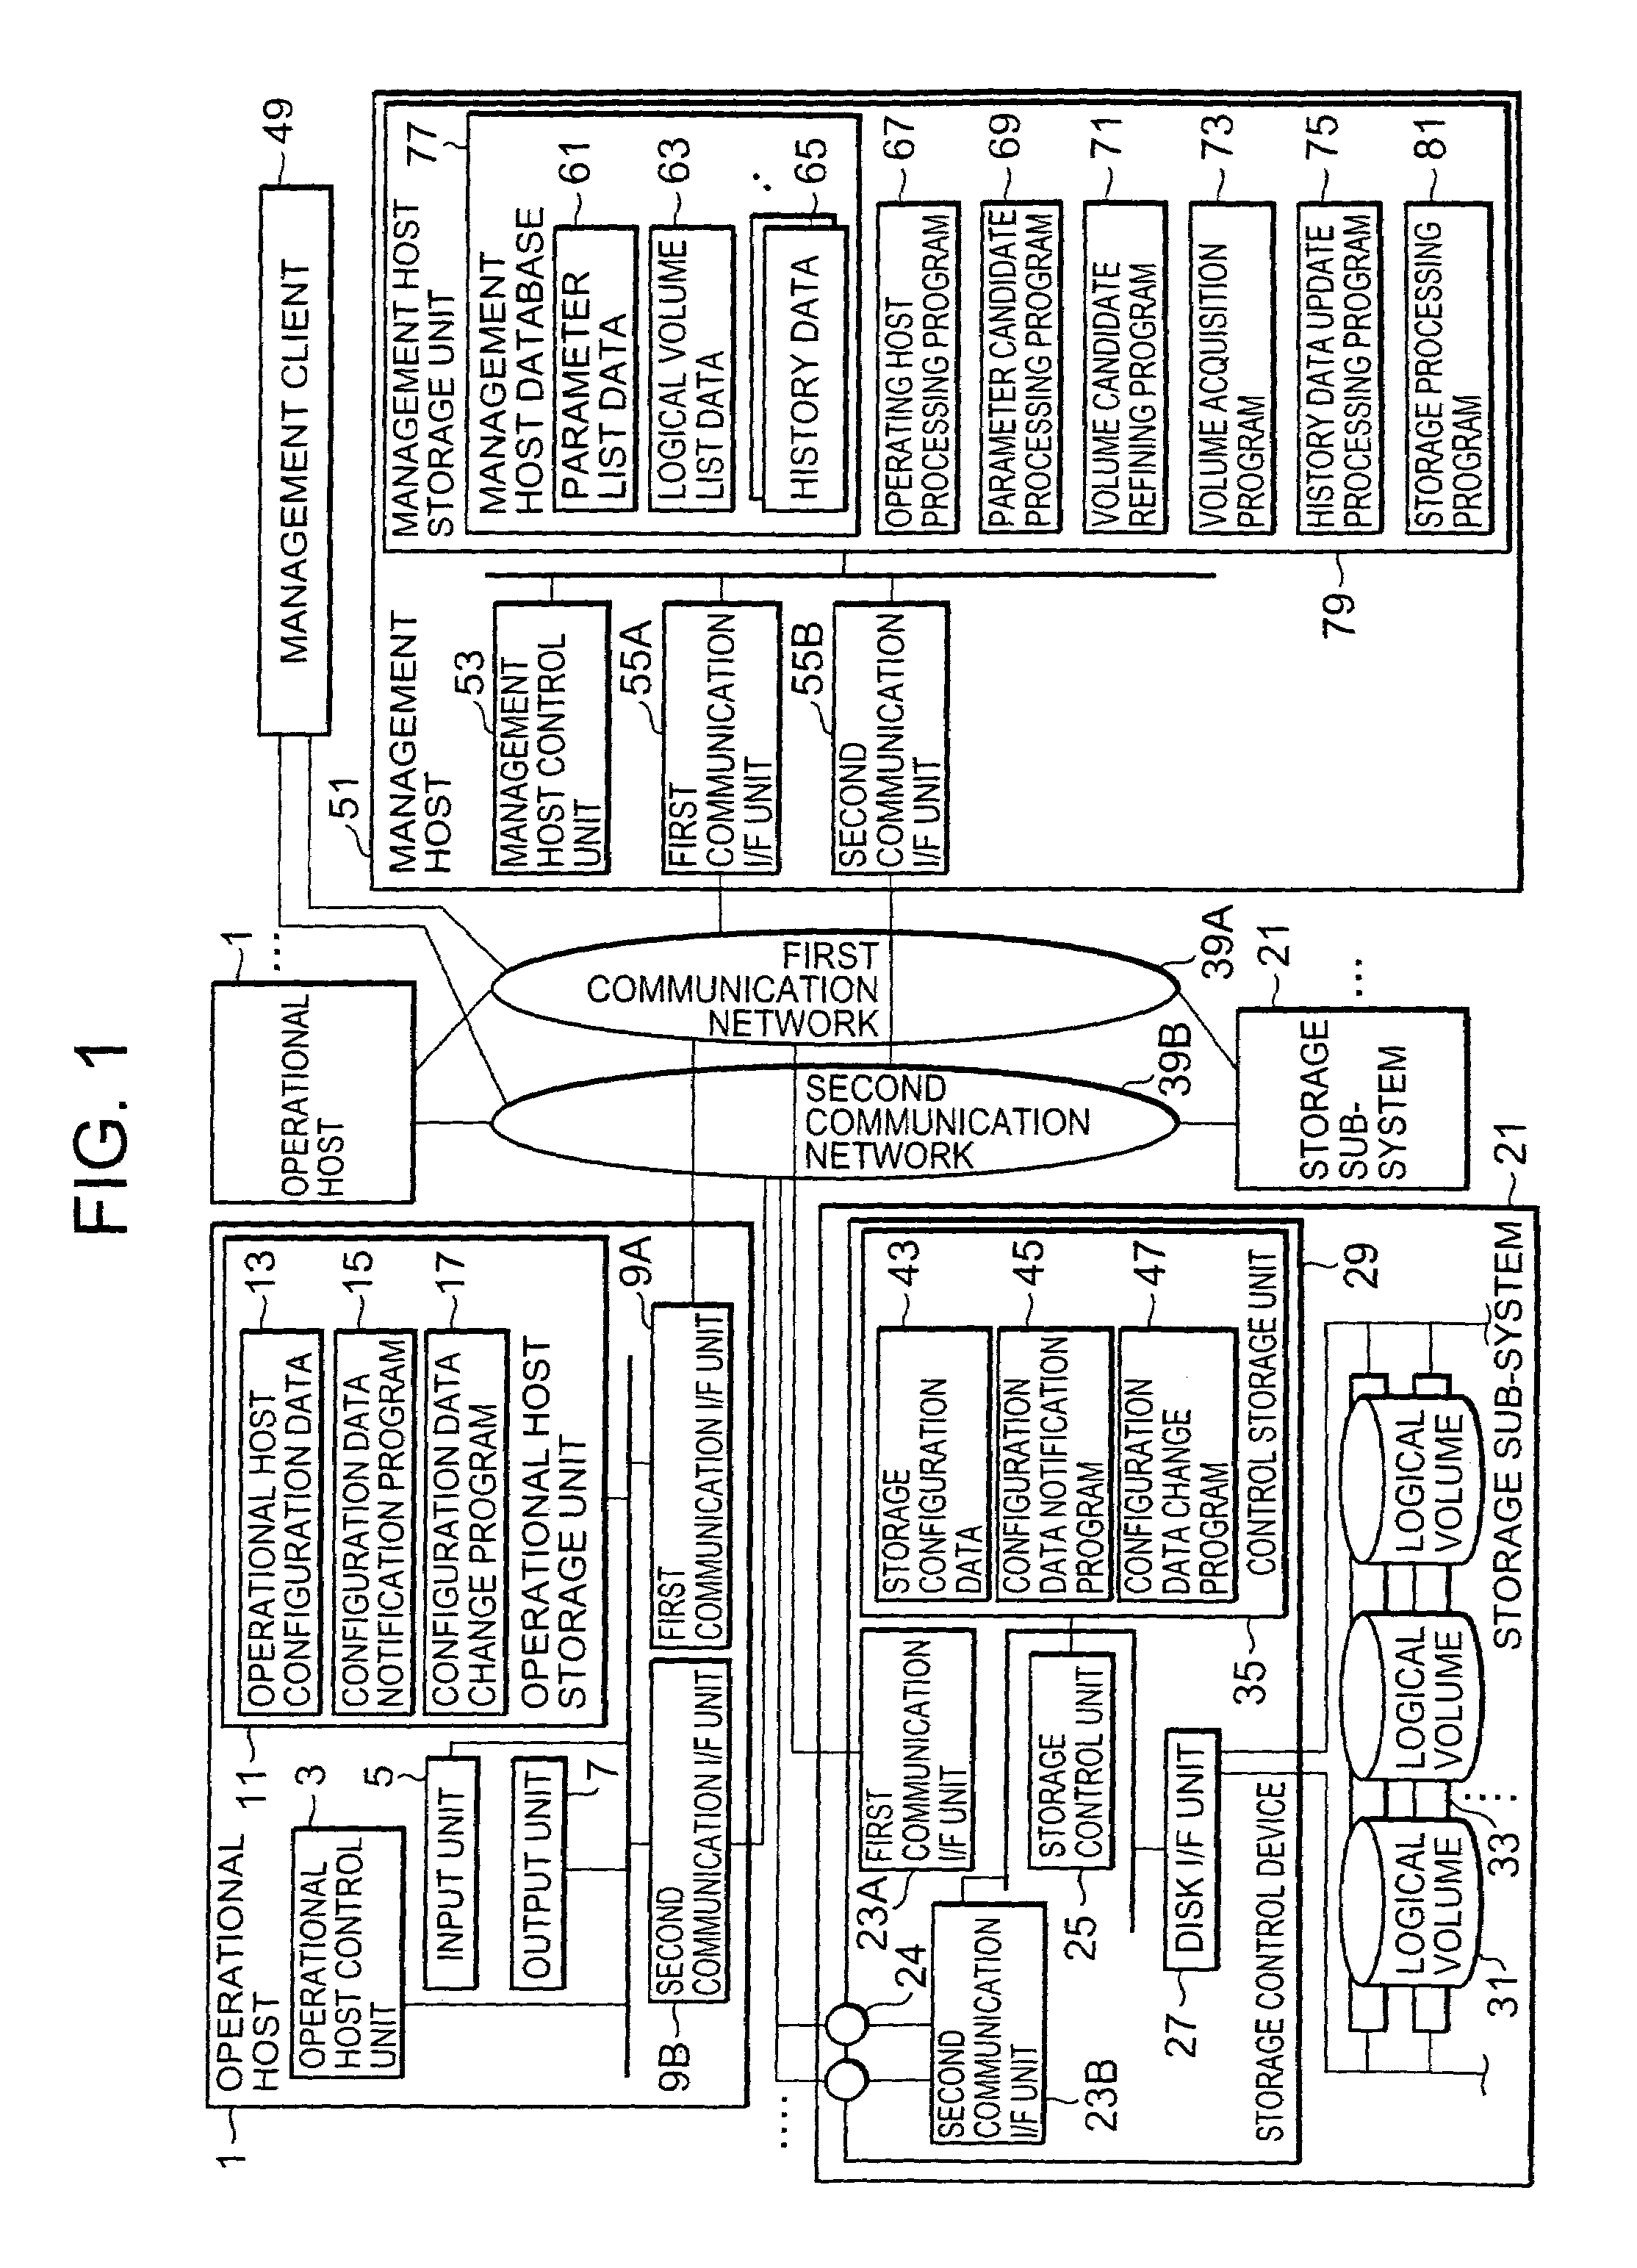 Volume management system and method